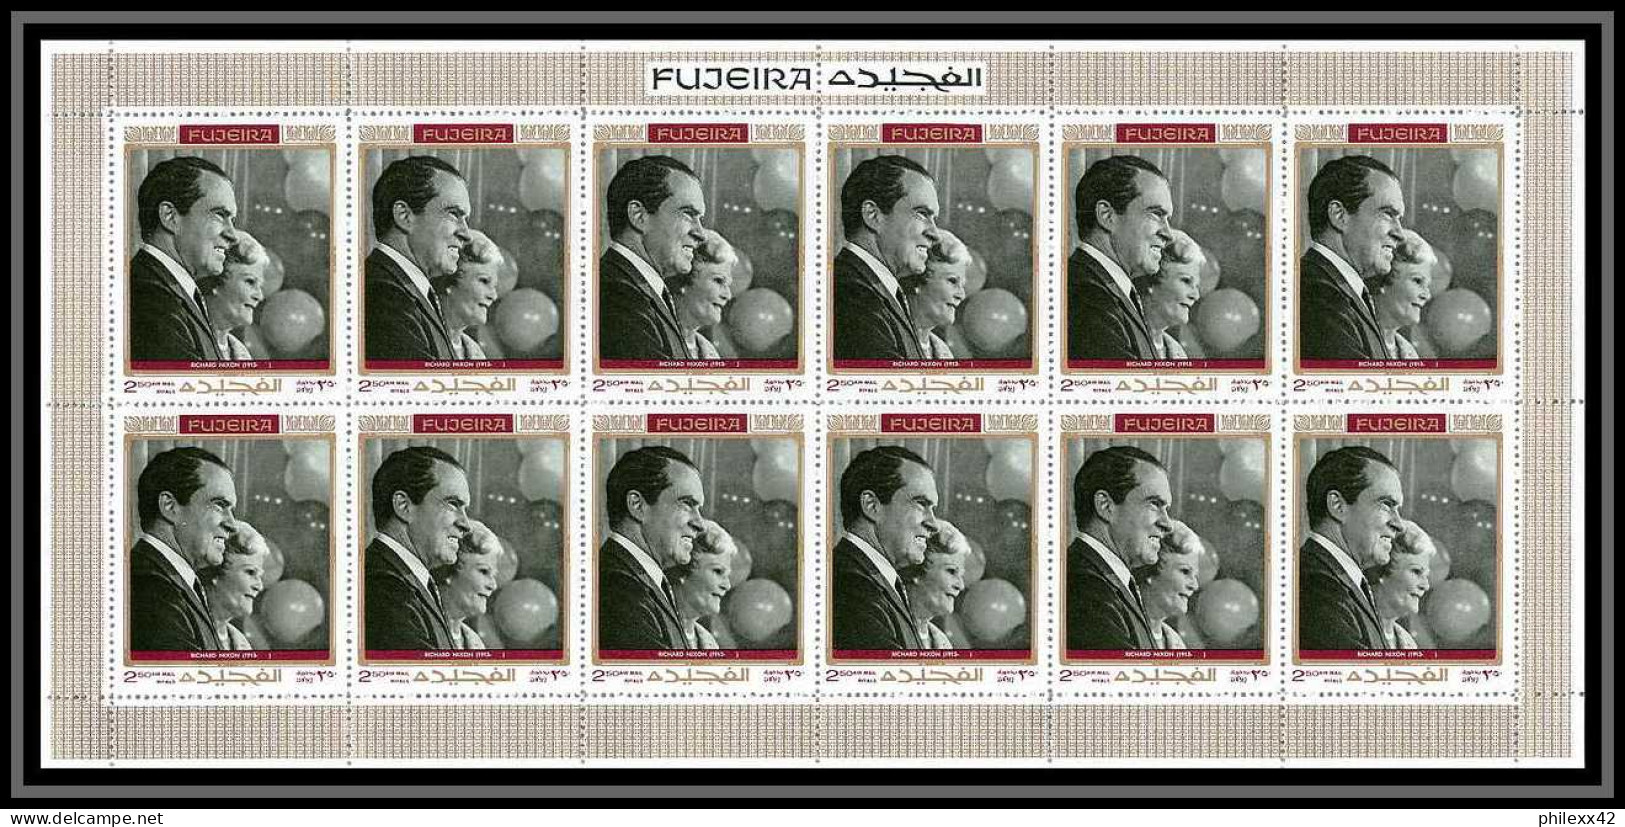 364 Fujeira MNH ** Mi N° 485 / 494 A personalities from american history space kennedy armstrong lincoln feuilles sheets